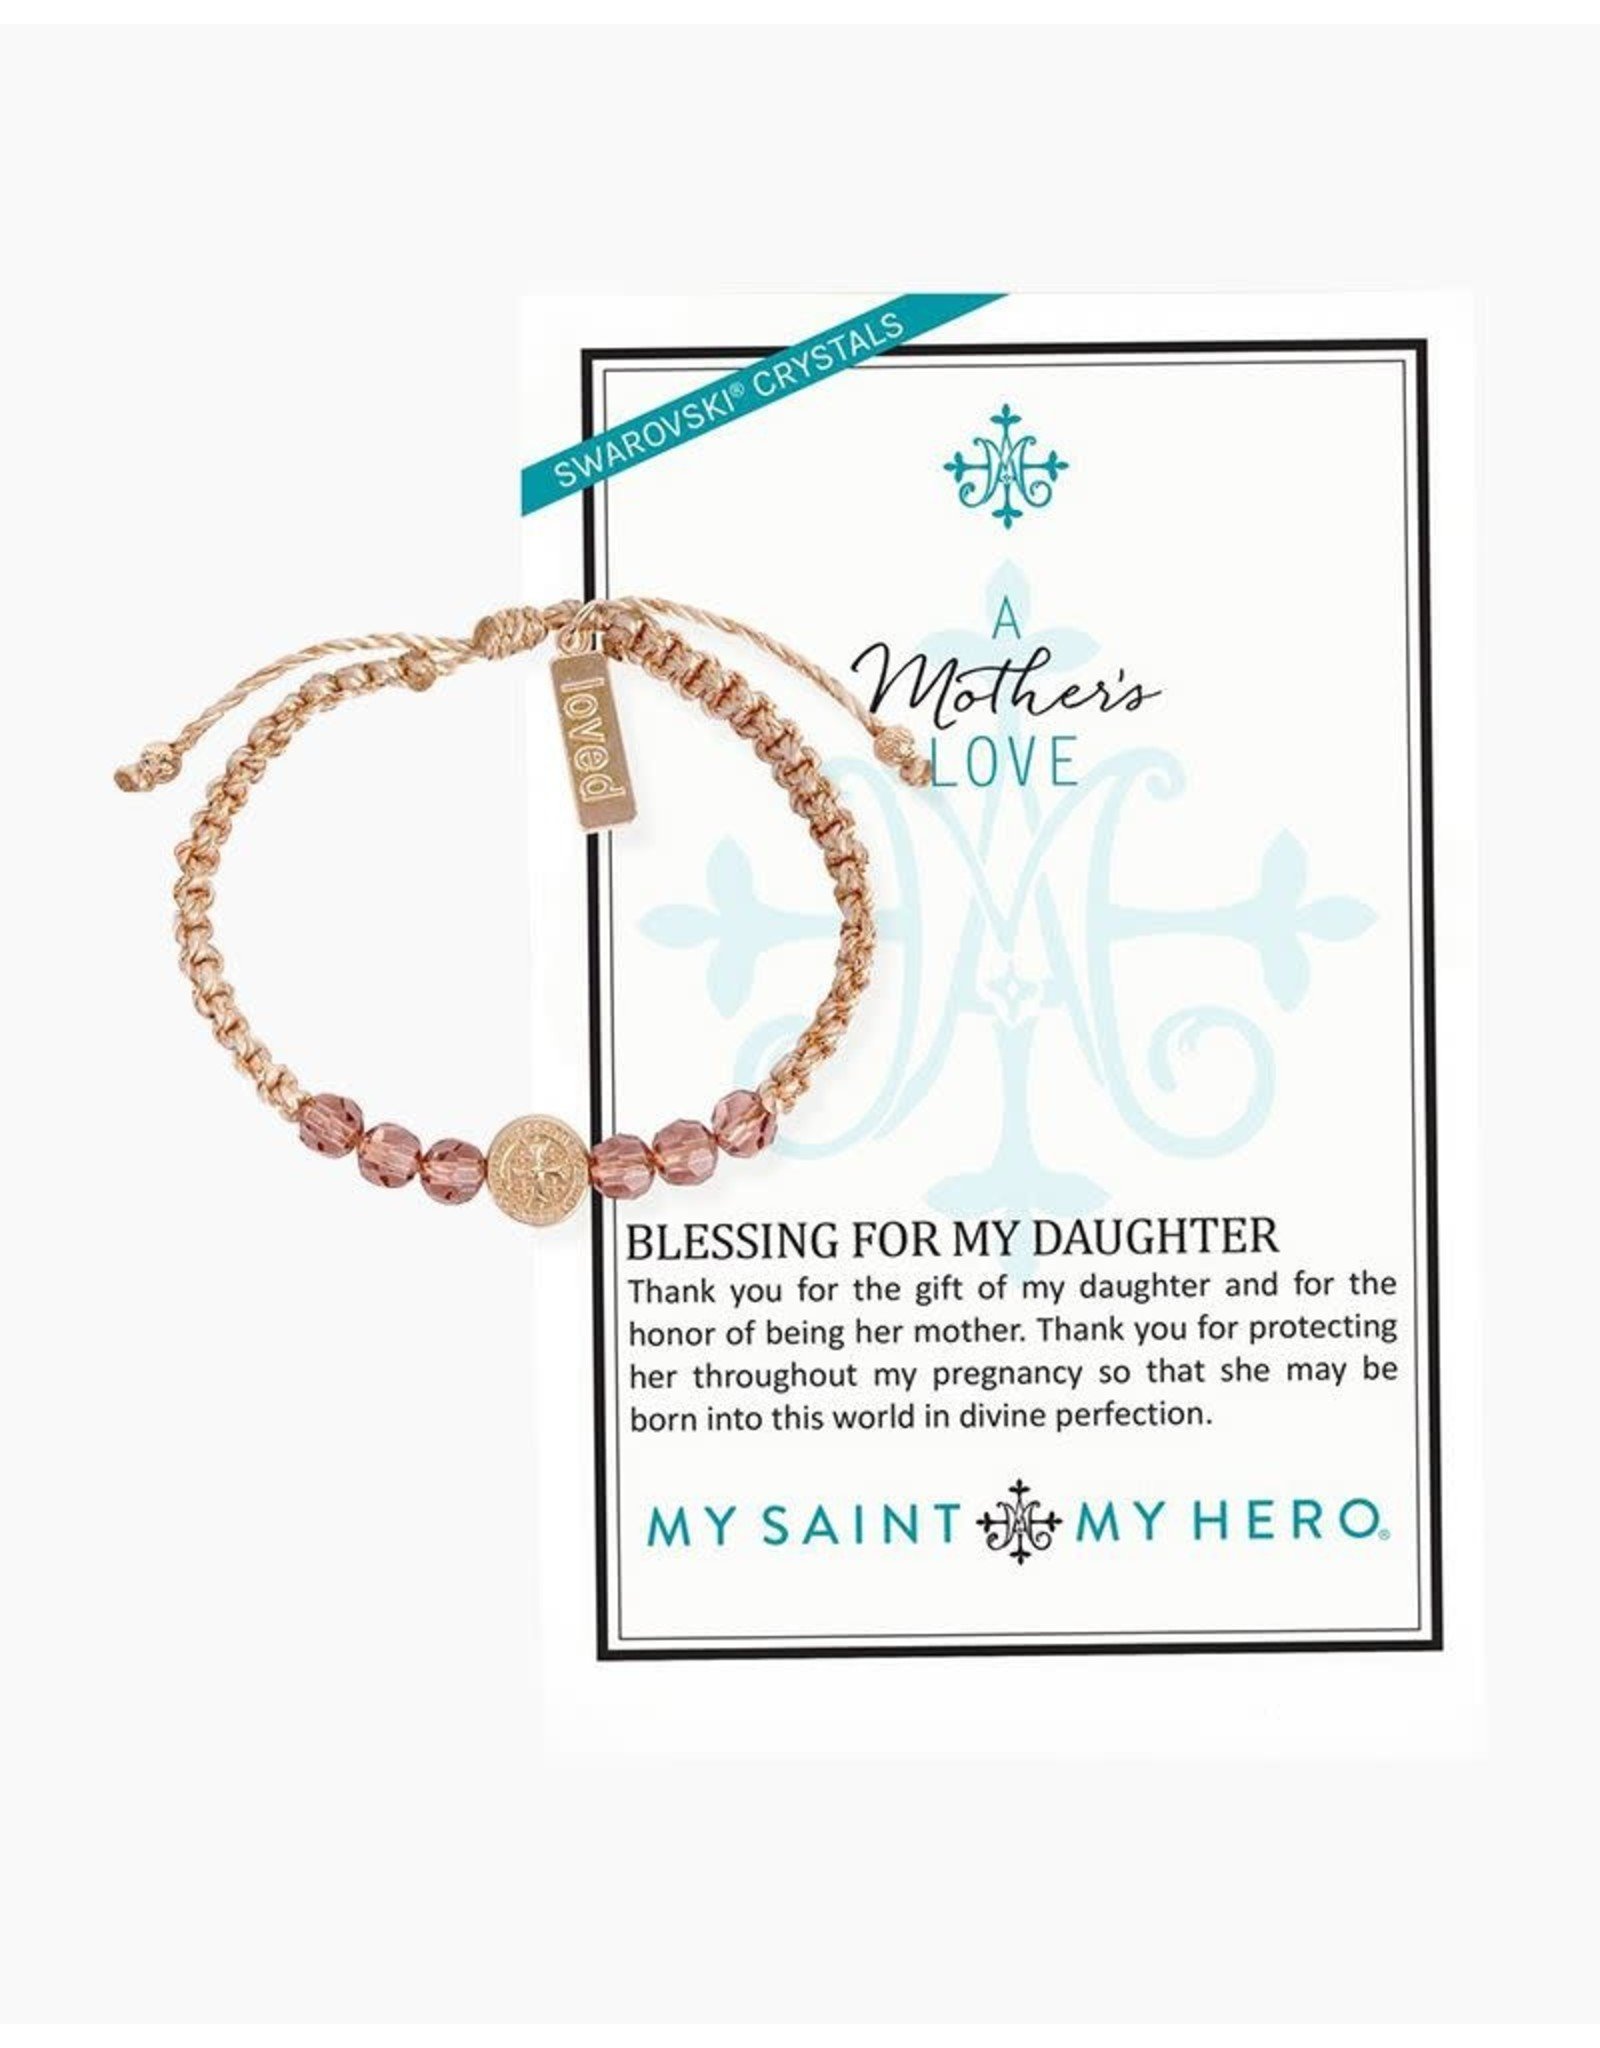 My Saint My Hero Bracelet - A Mother's Love (Blessing for my Child)